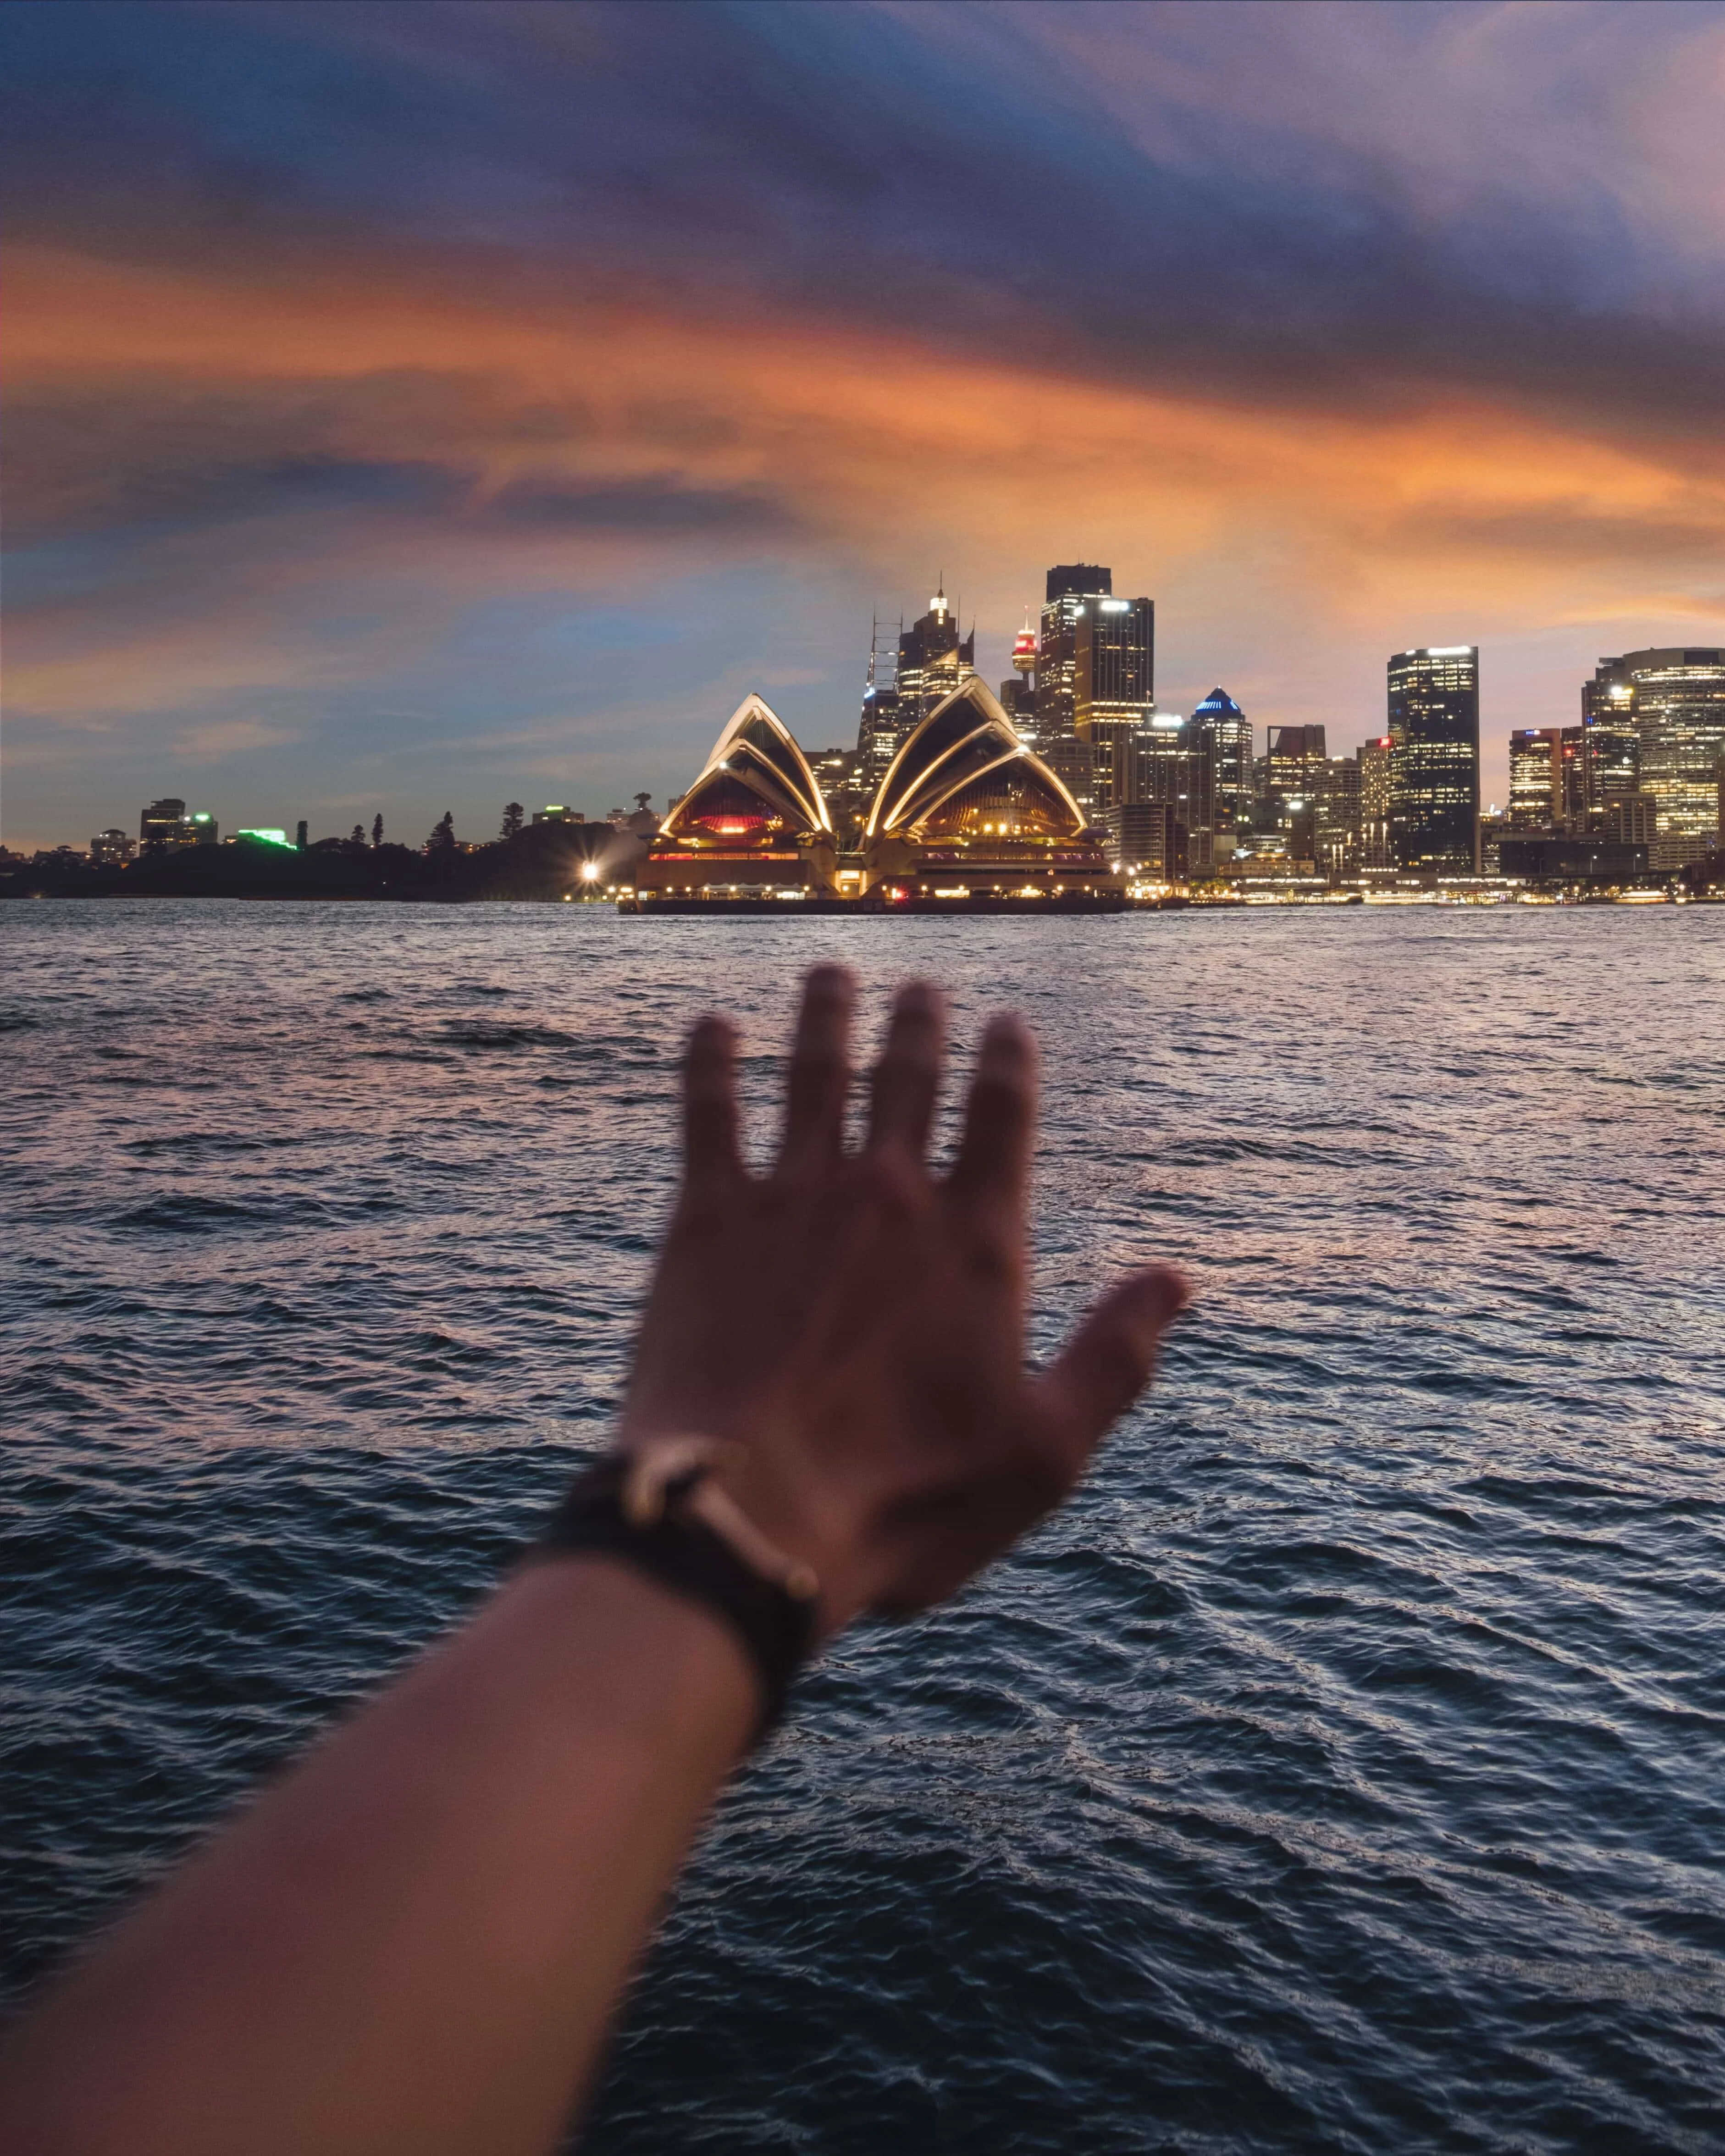 Moving to Australia? This post has all the information you'll need to plan your move to Australia. Visas, jobs, farm work, banking Information & much more!